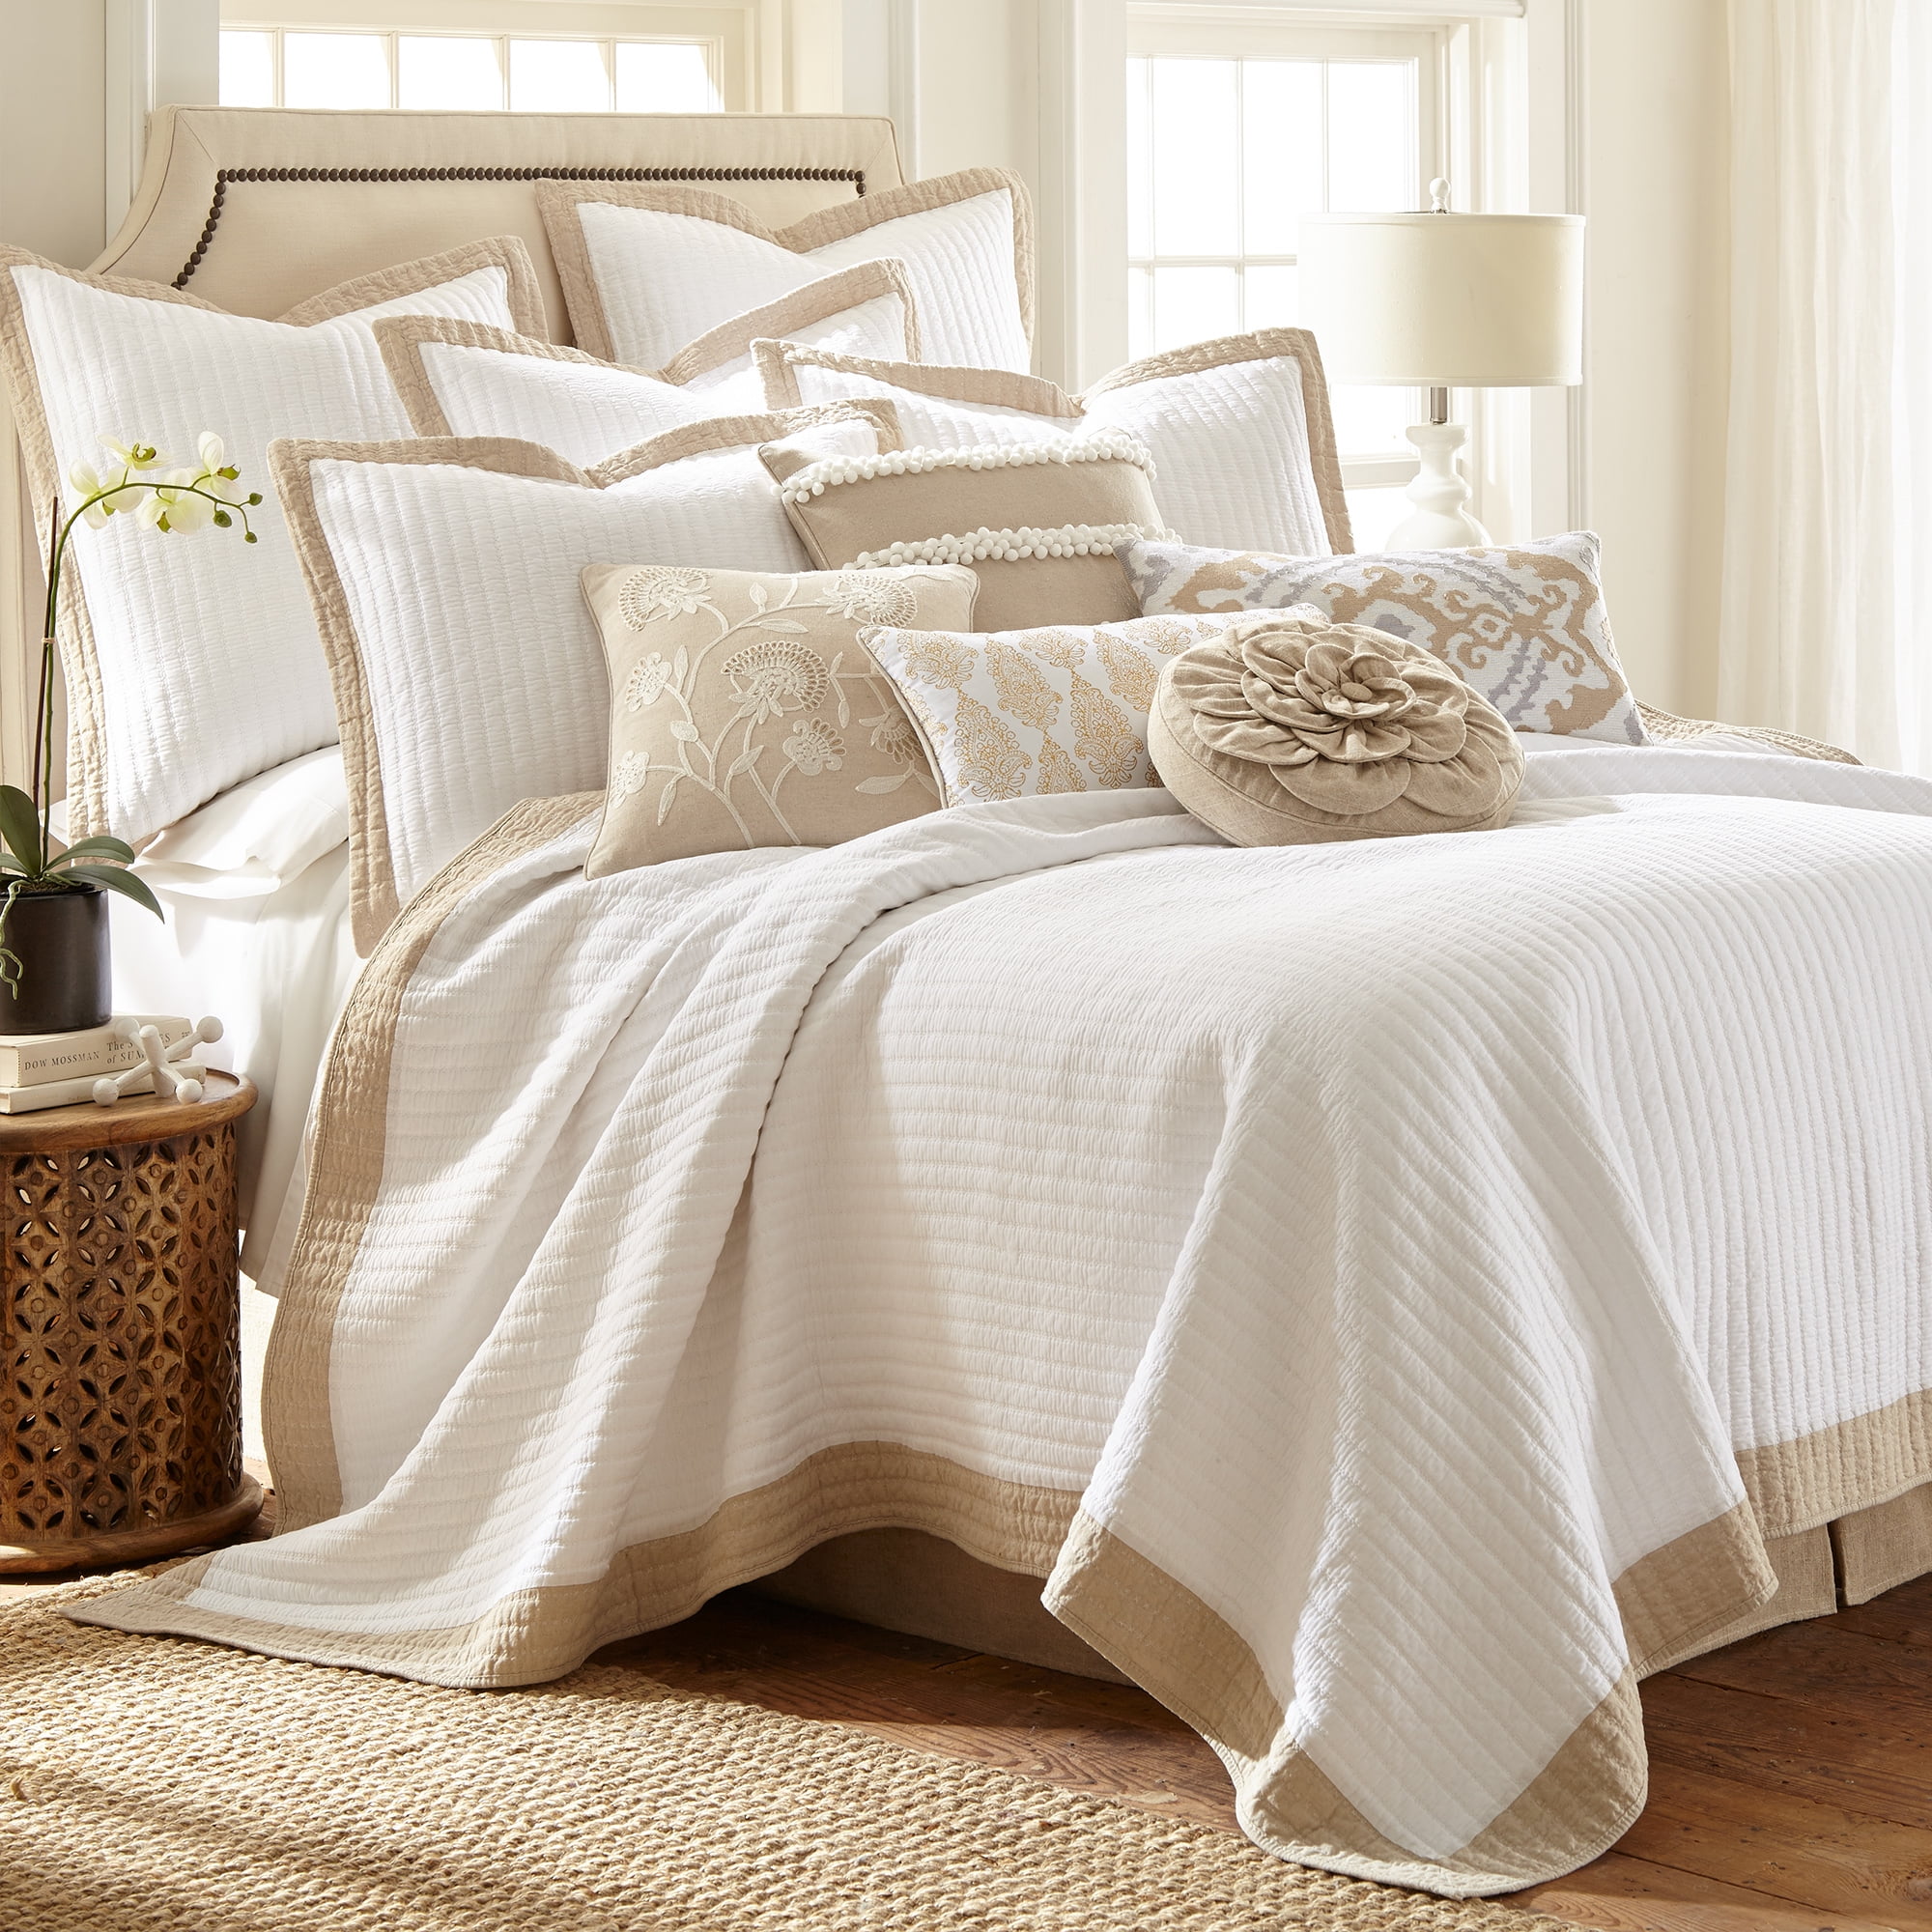 Details about   Laura Ashley HomeBedford CollectionLuxury Premium Ultra Soft Quilt Cove... 